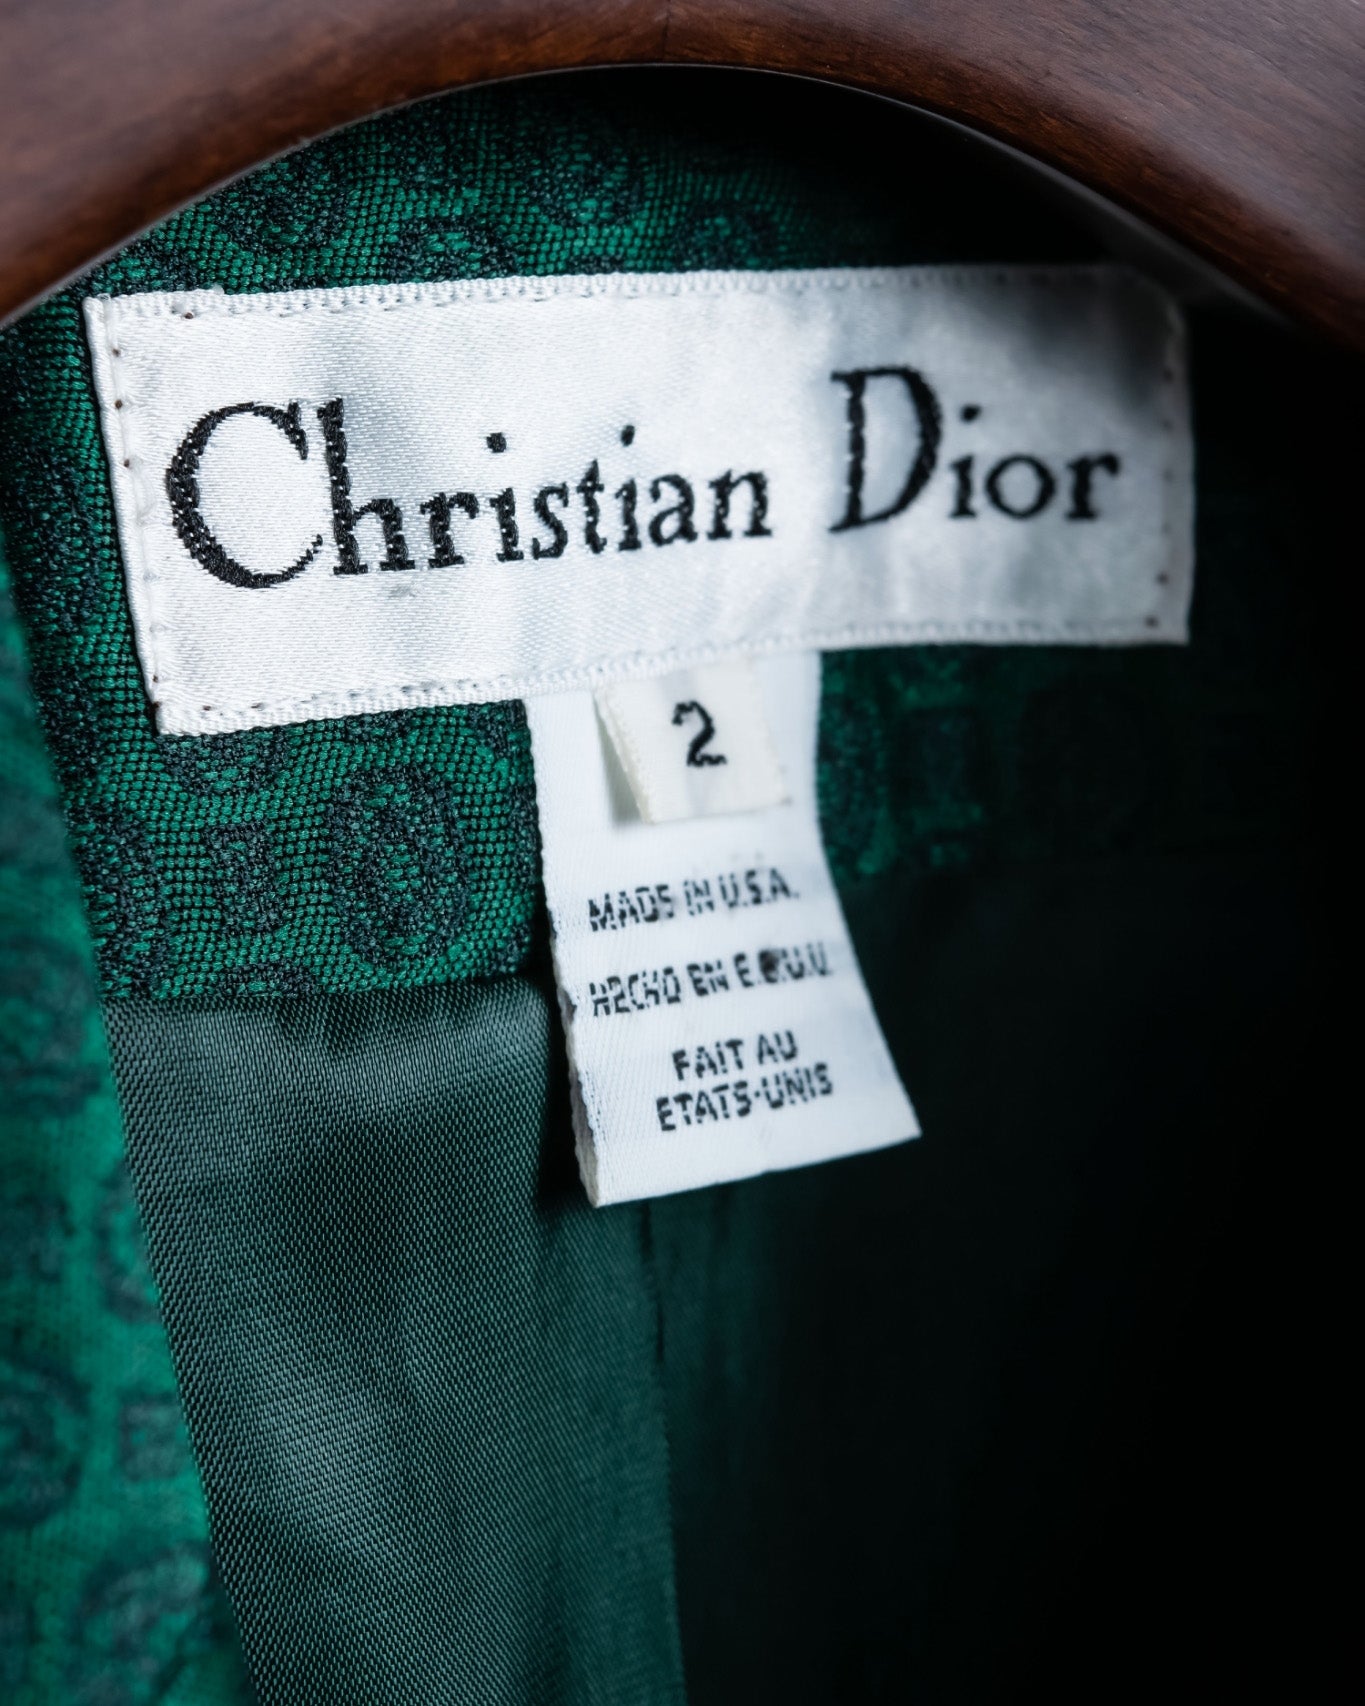 Dior Green Tailored Jacket